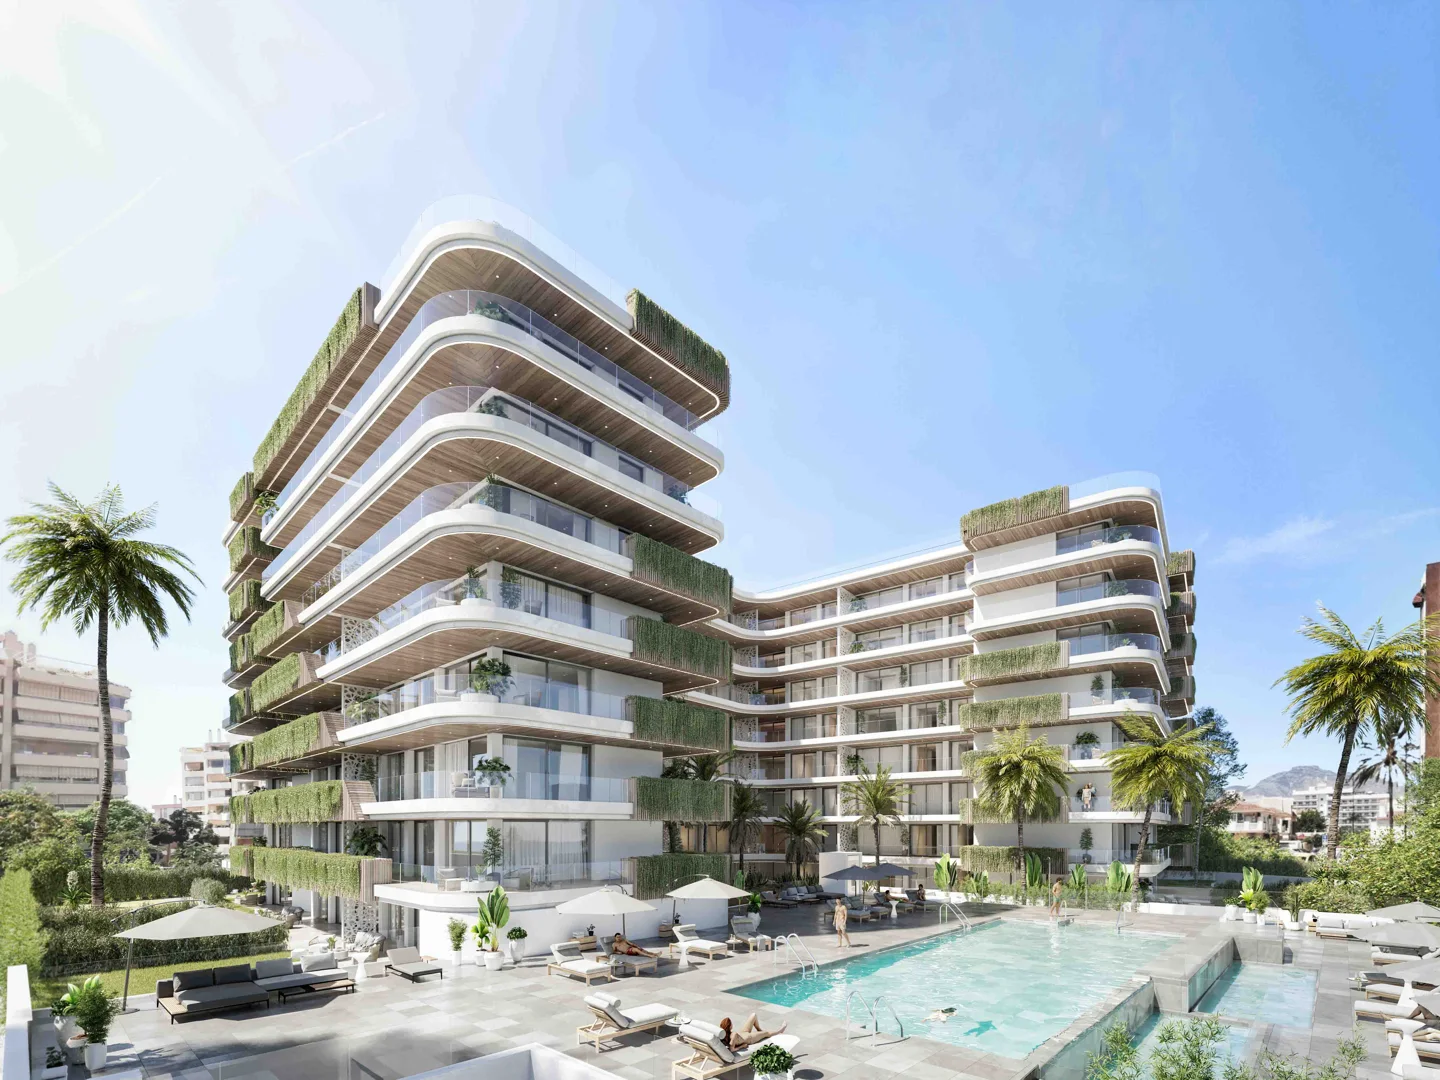 Exclusive residential complex next to the beach